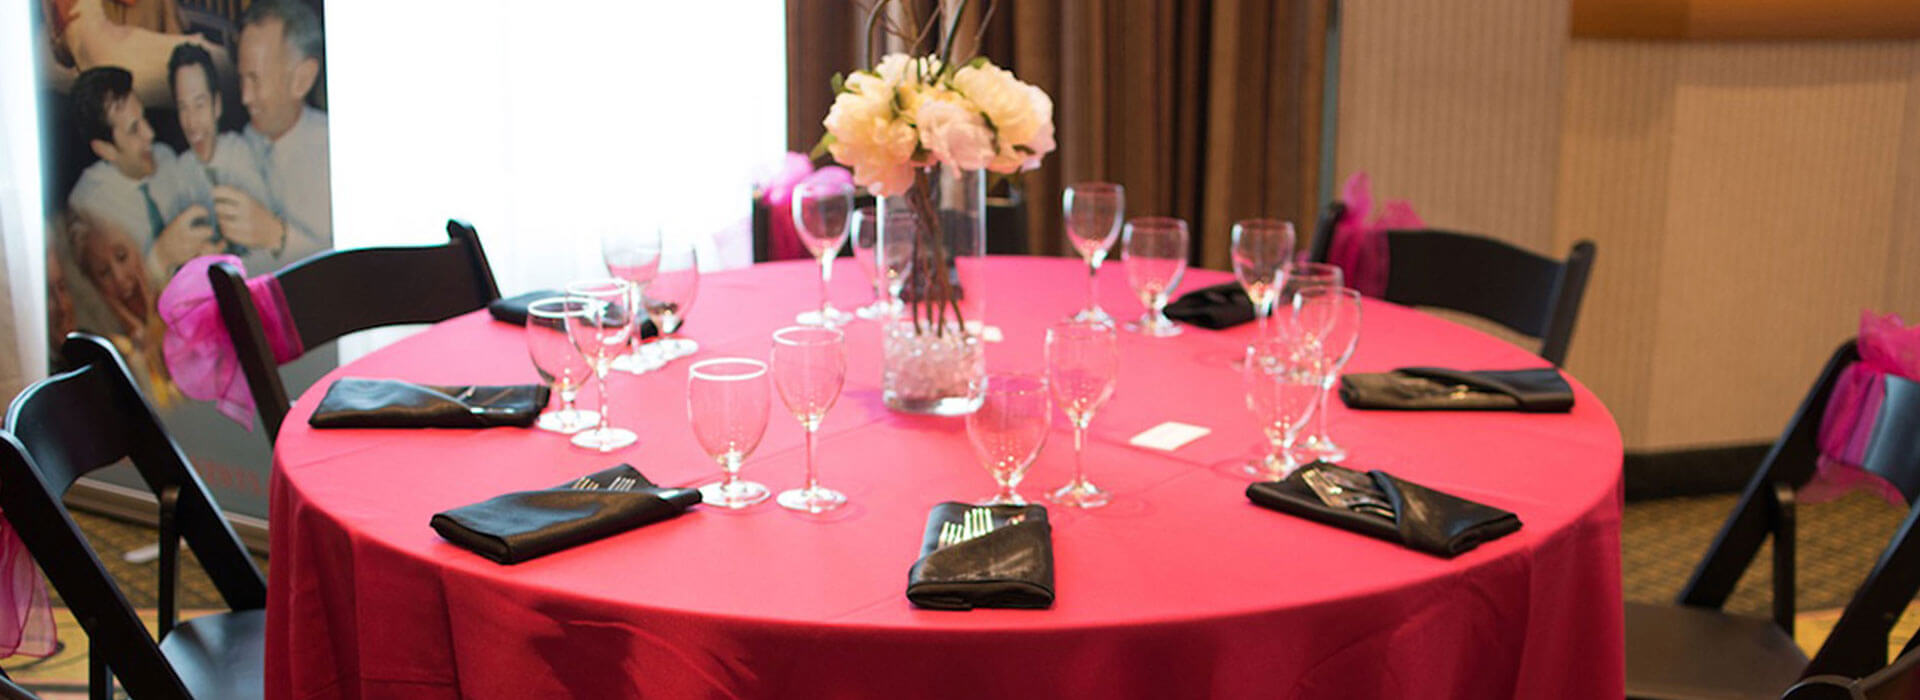 Elegant table with red table cloth, wine glasses and flowers at Holiday Inn North Vancouver